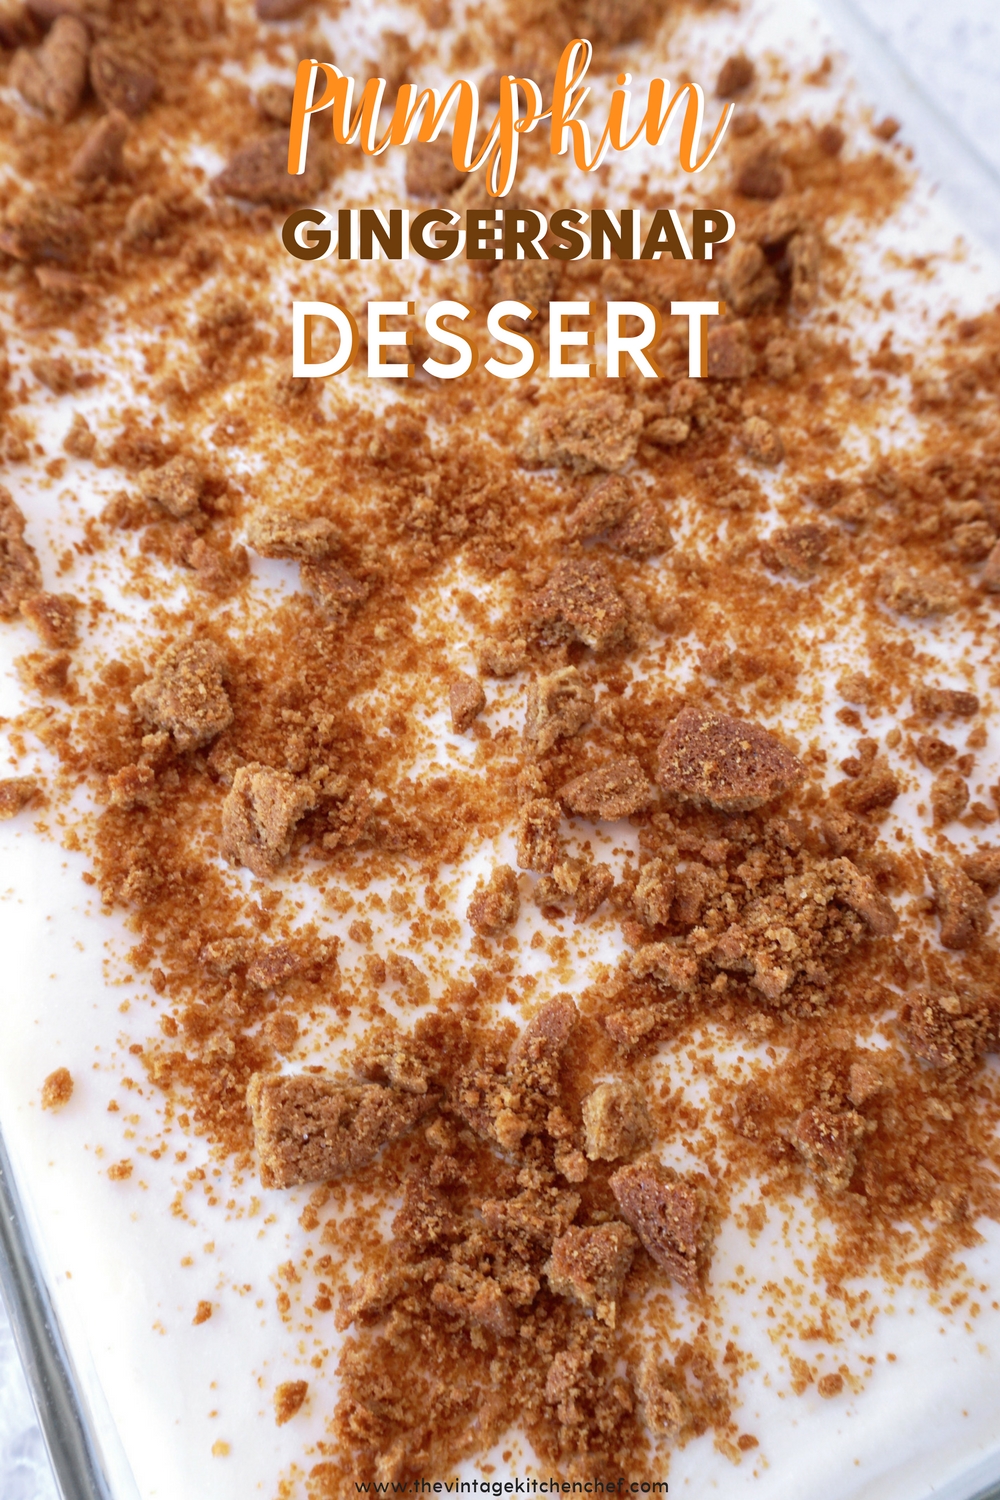 Gingersnap crust makes all the difference with this no-bake dessert. Layers of pumpkin spice cheesecake, pudding and whipped topping on a gingersnap crust.